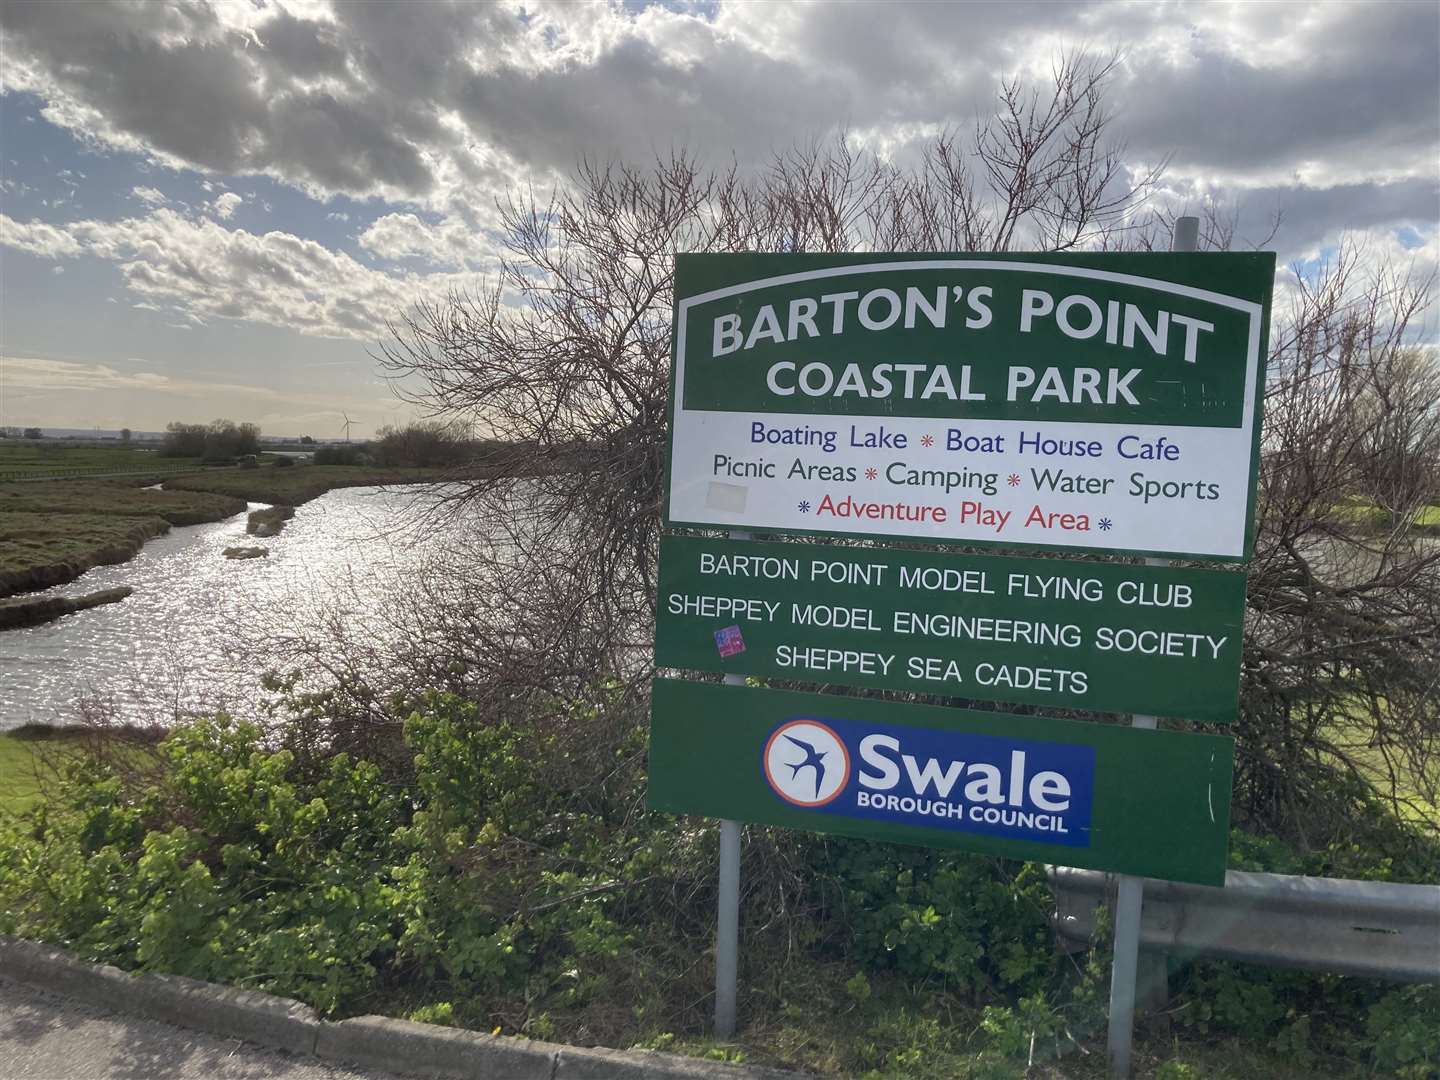 Swale council is looking for a new firm or individual to take over running Barton's Point Coastal Park